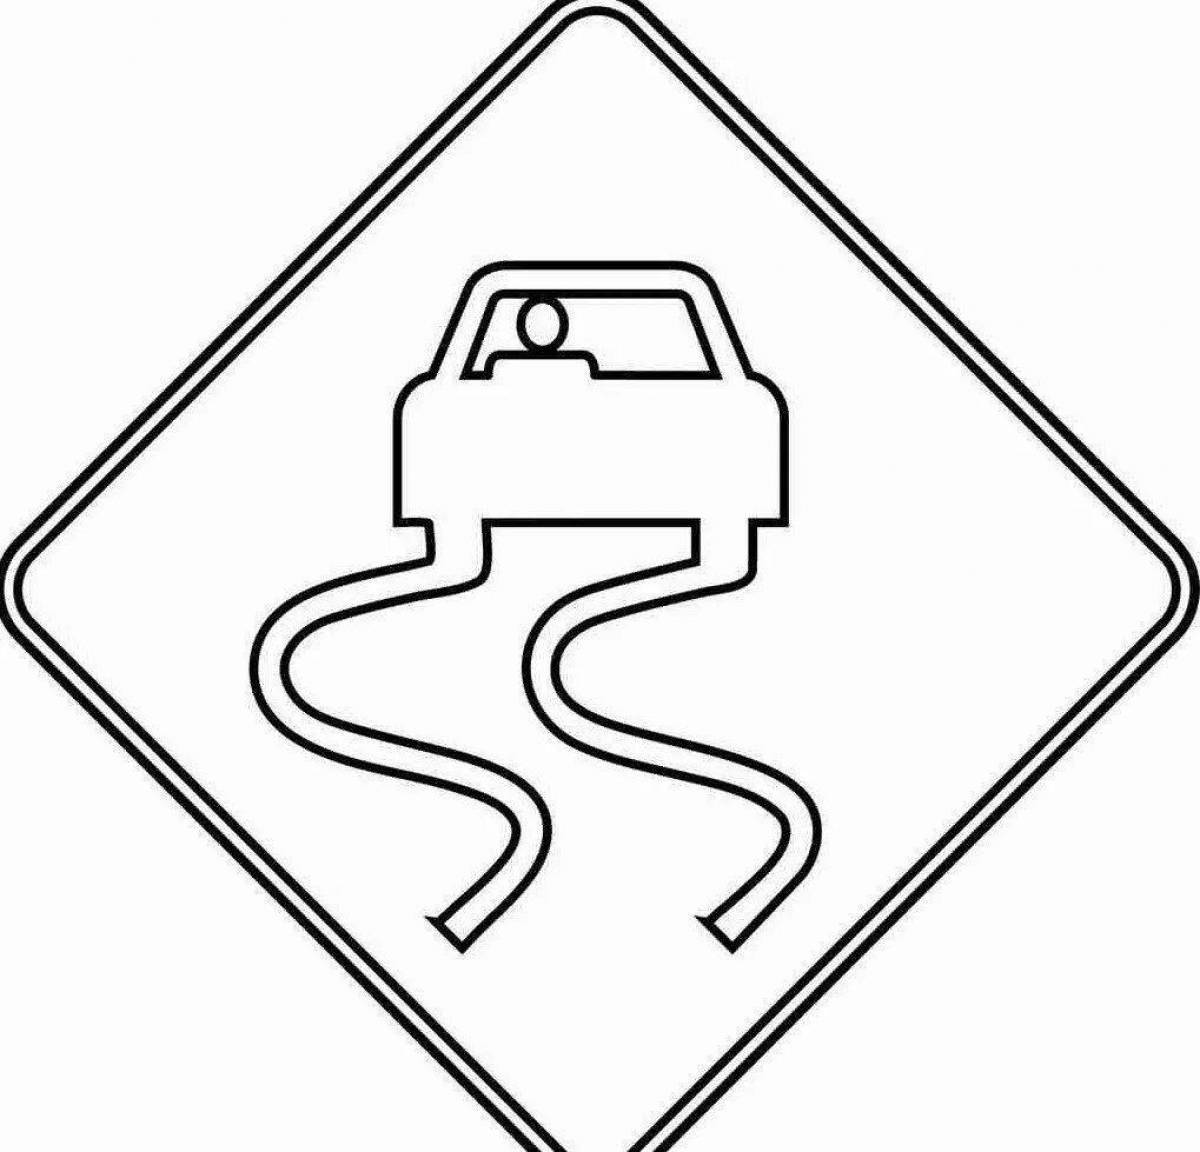 Coloring page dazzling traffic signs